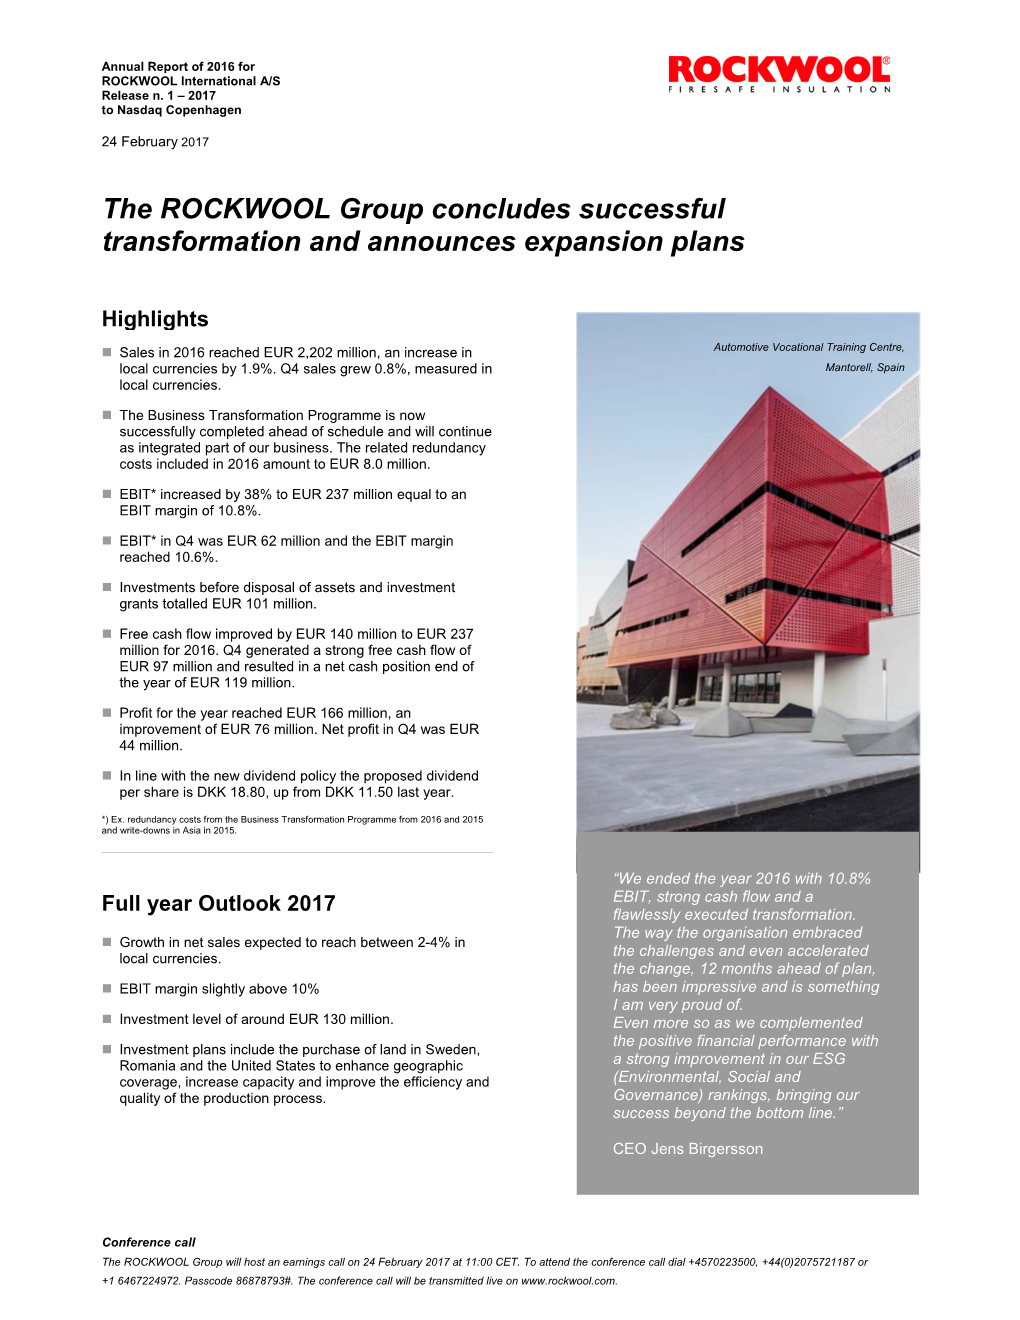 The ROCKWOOL Group Concludes Successful Transformation and Announces Expansion Plans